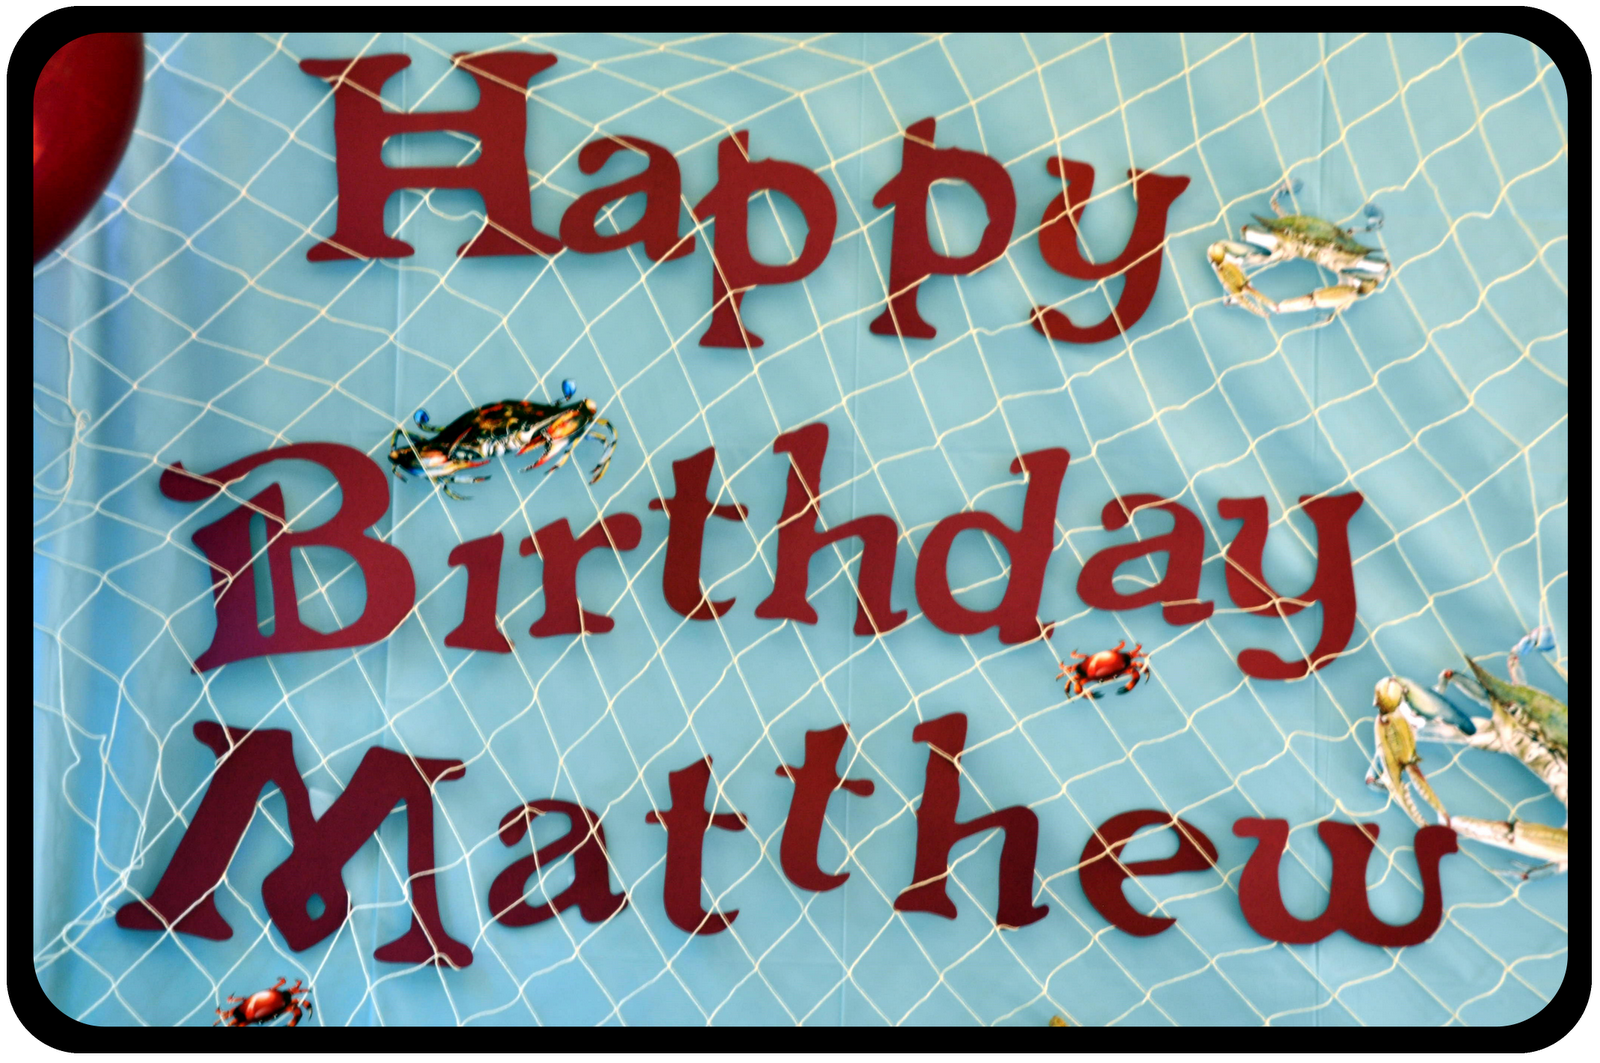 Birthday Happy Matthew Computer Facts Placed Printed Fish.